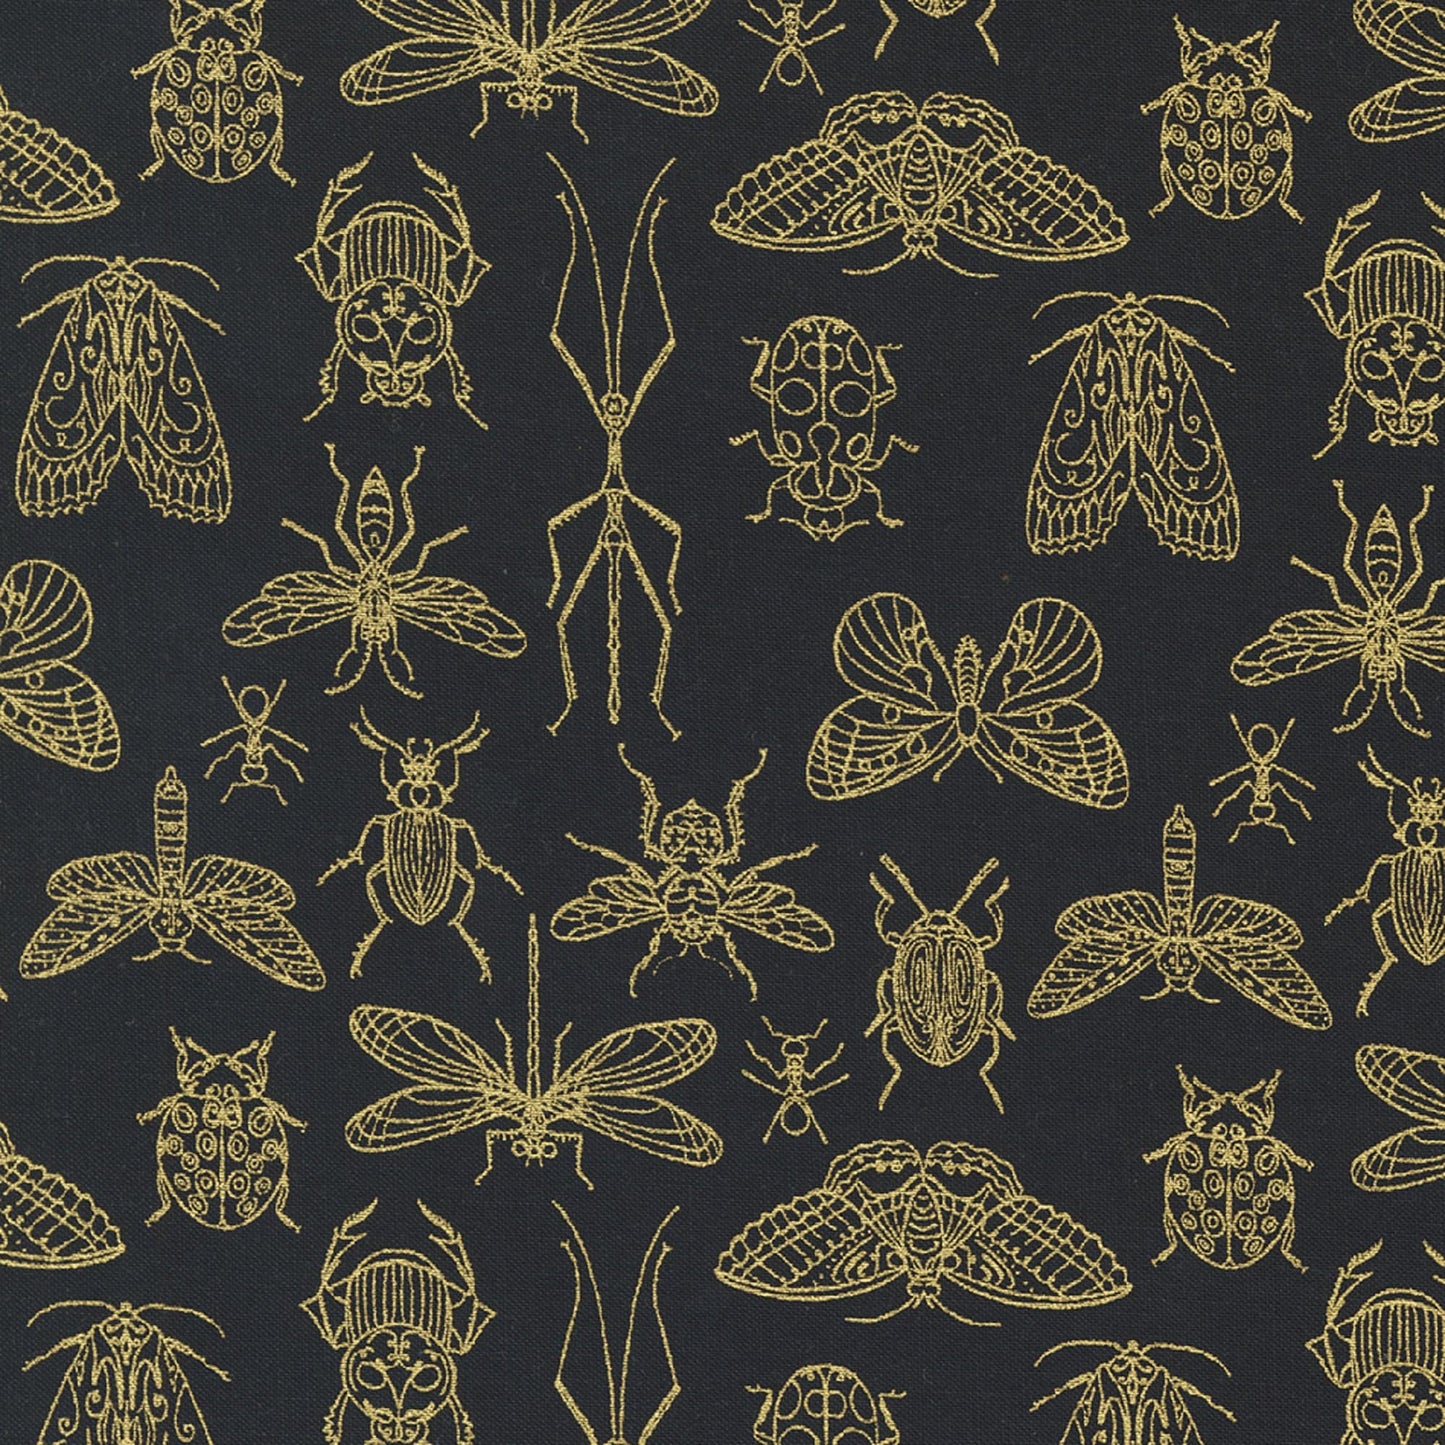 Midnight Insects Night Gold METALLIC Meadowmere Gingiber Moda 100% Quilters Cotton Fabric Fetish